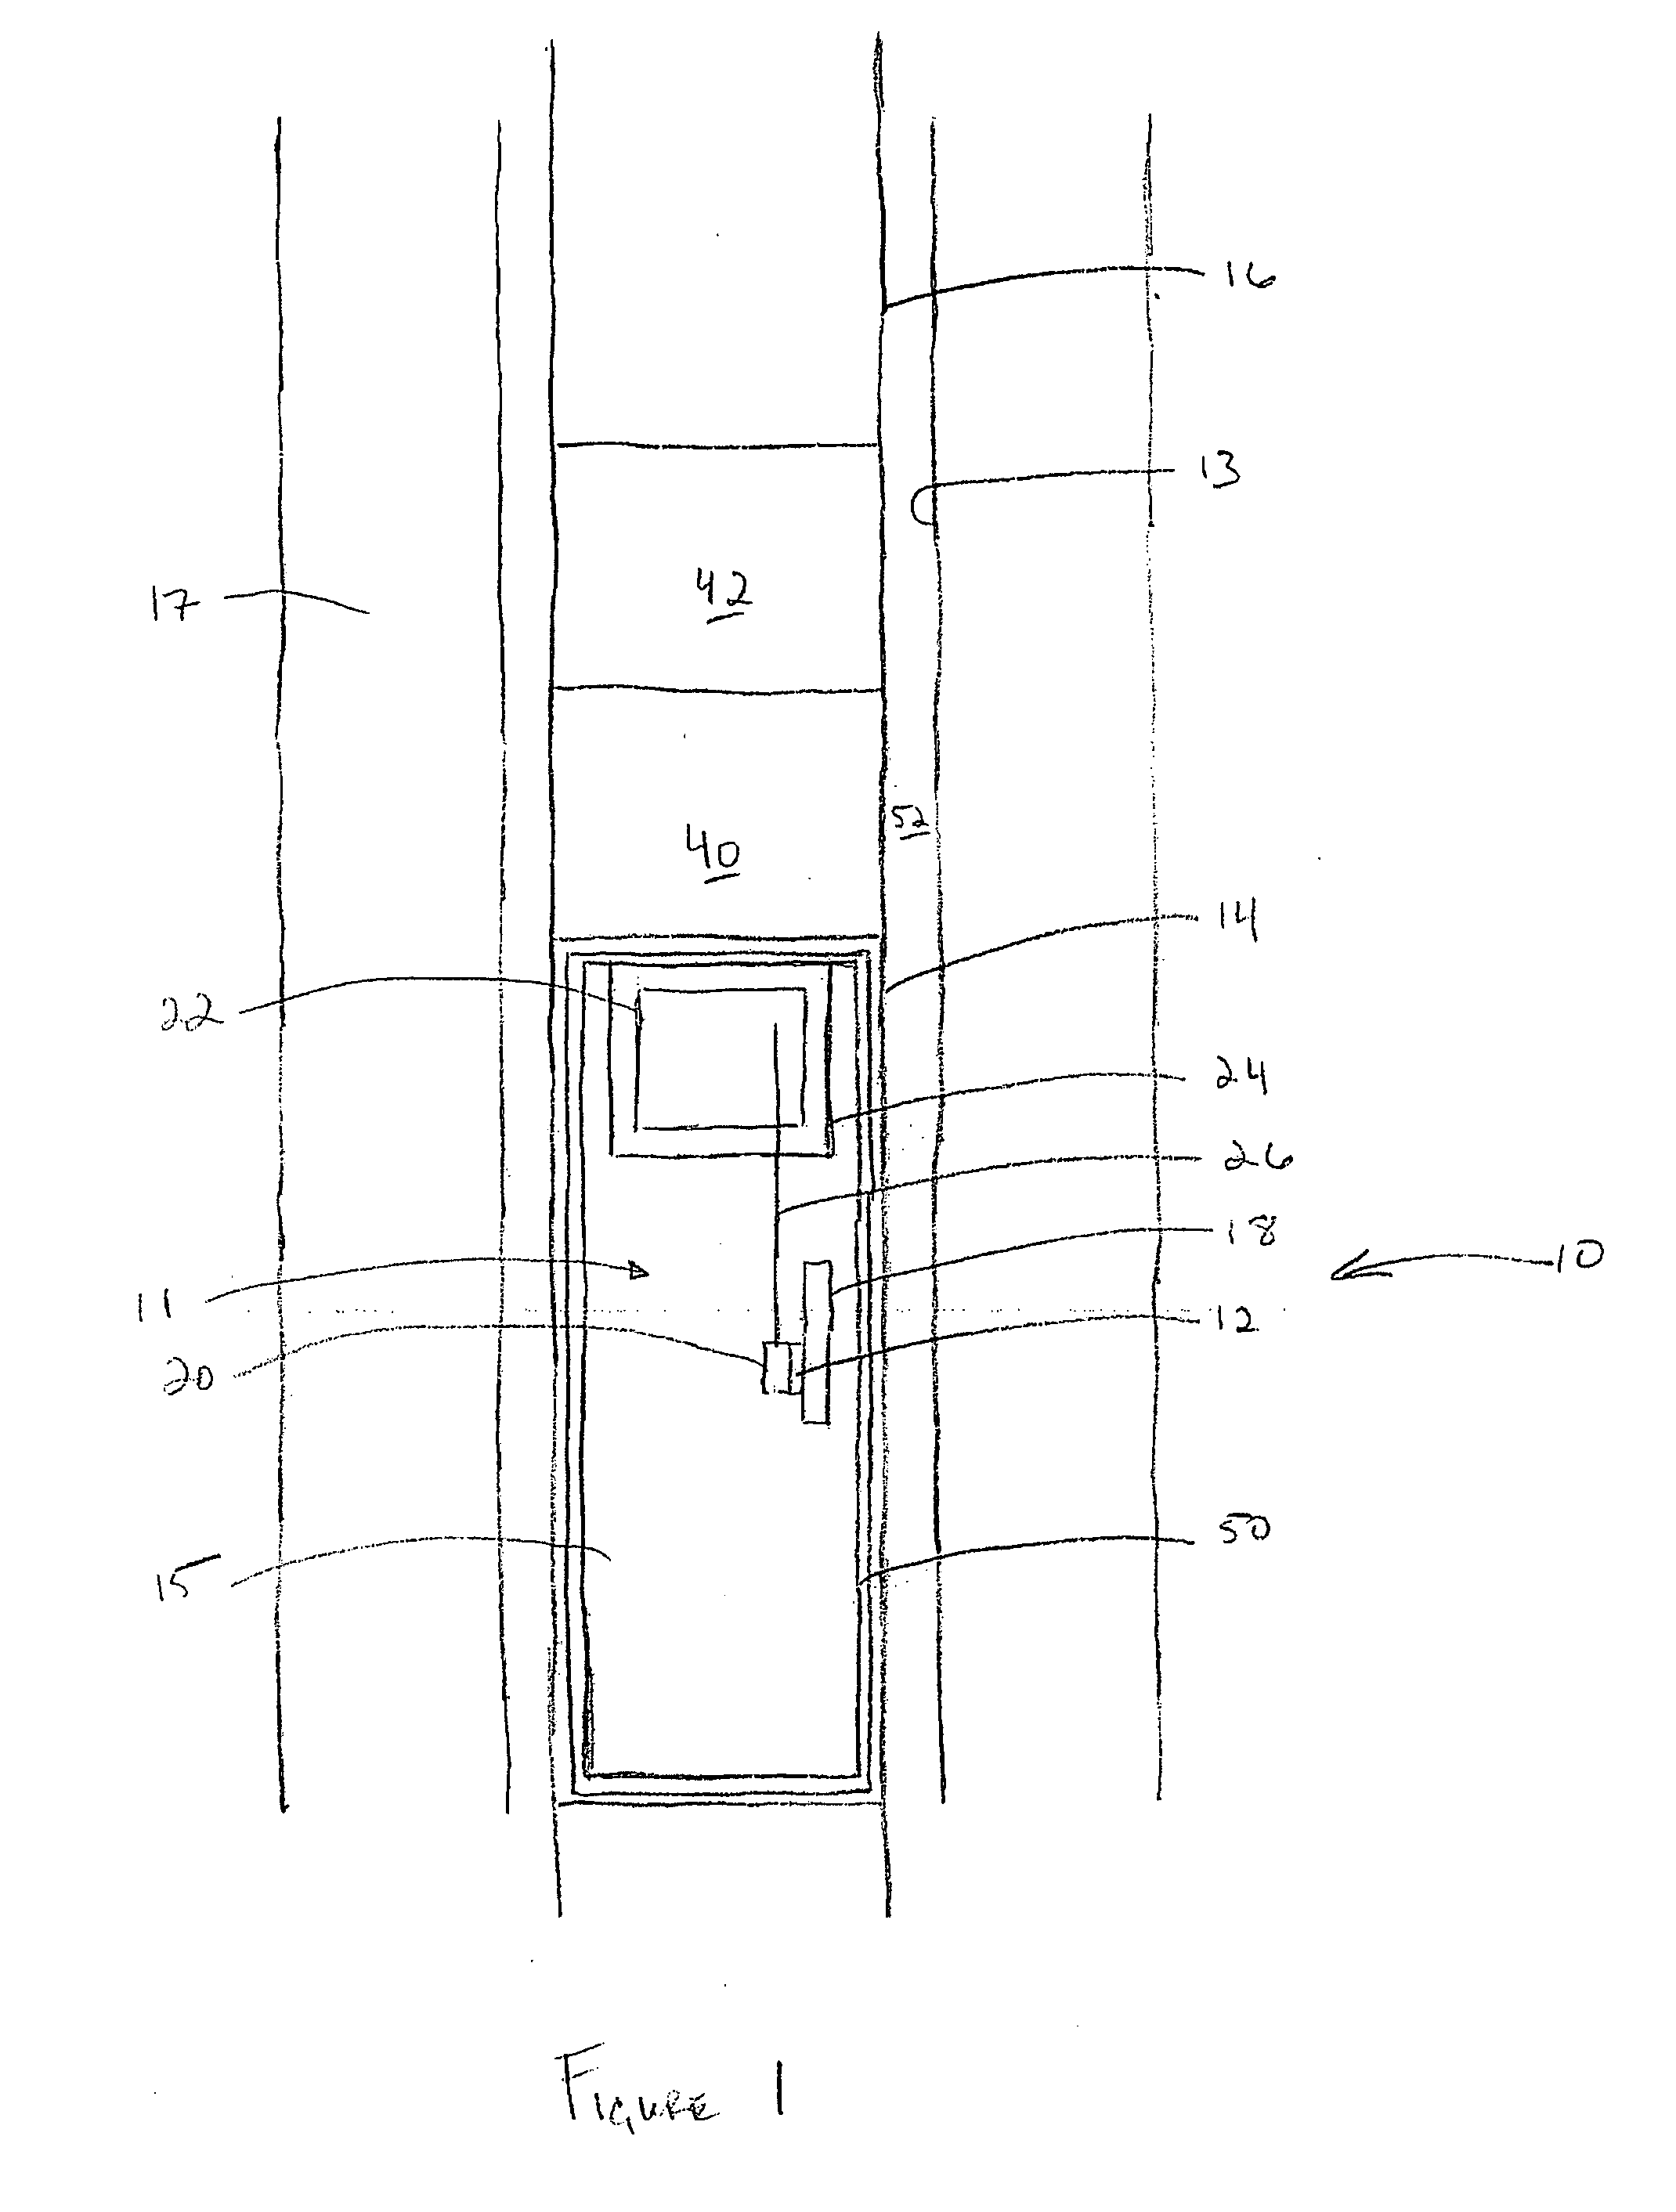 Thermal component temperature management system and method